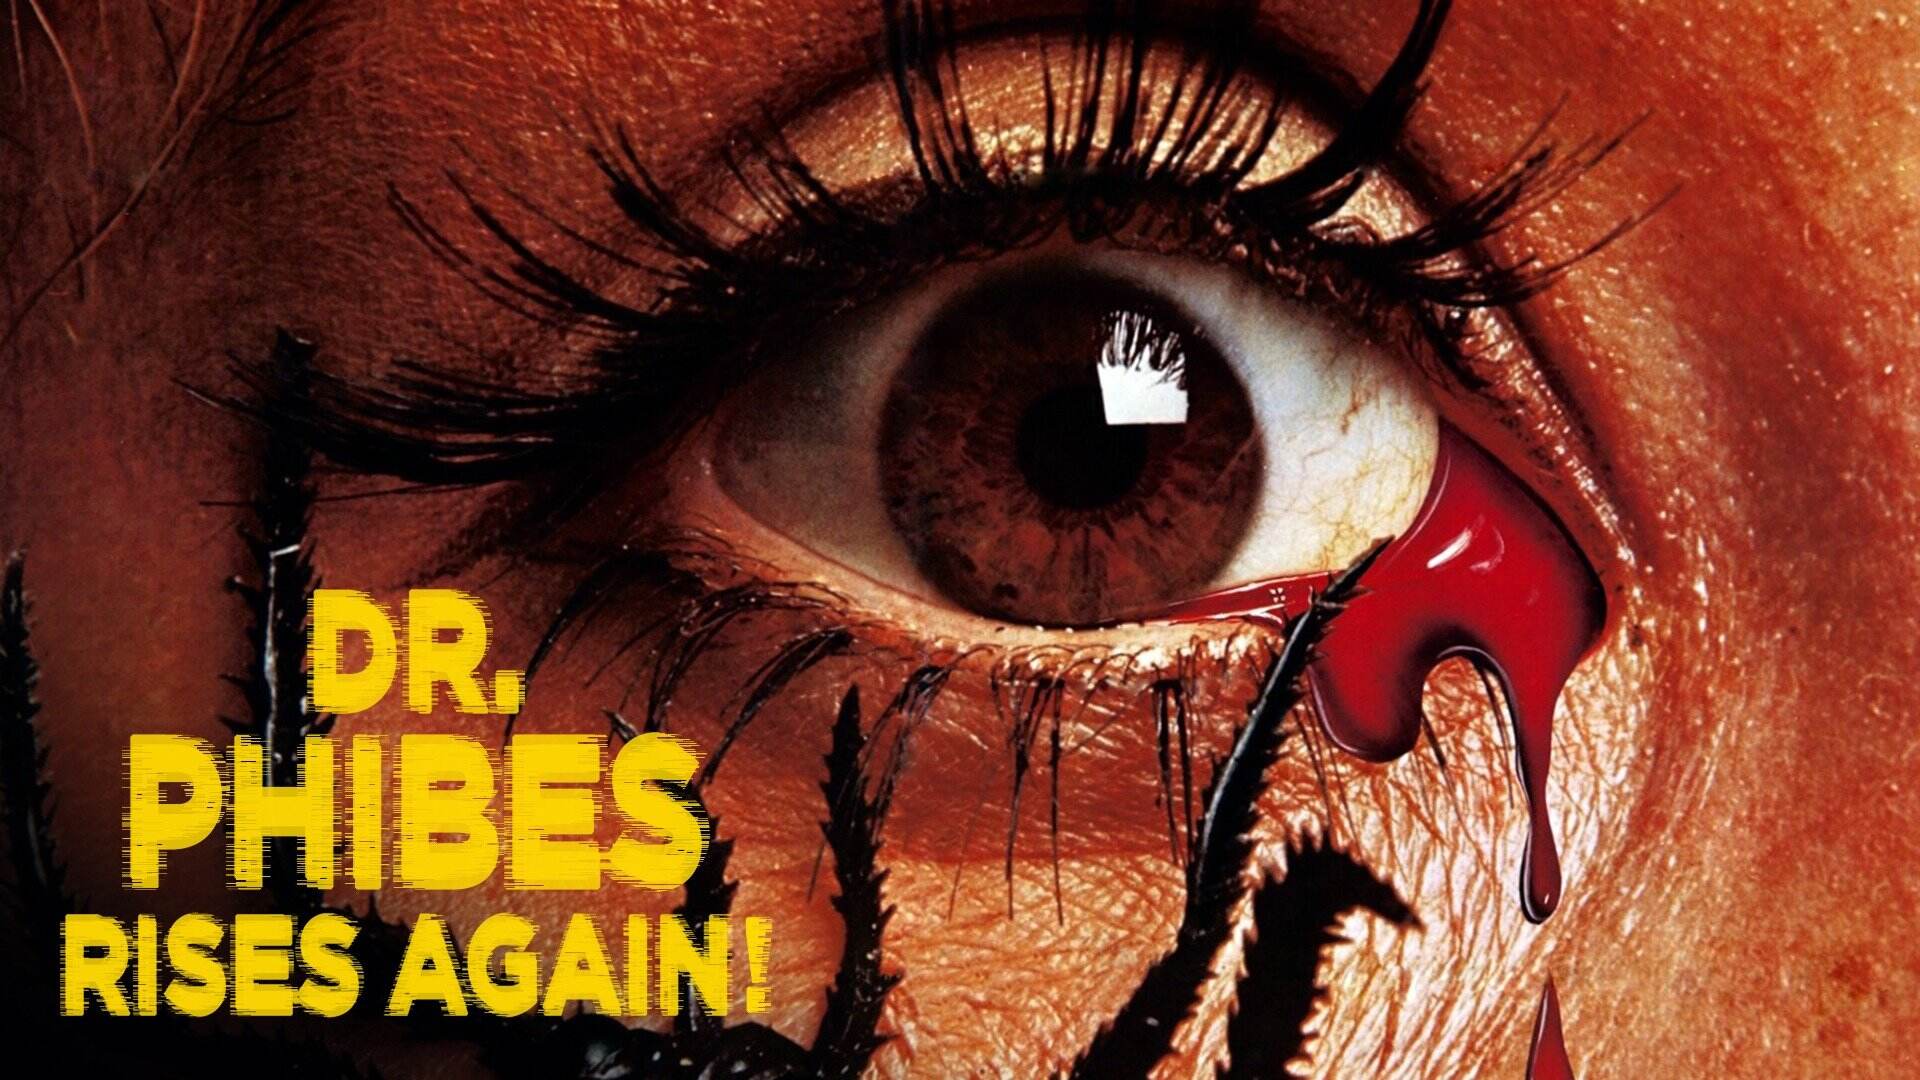 44-facts-about-the-movie-dr-phibes-rises-again